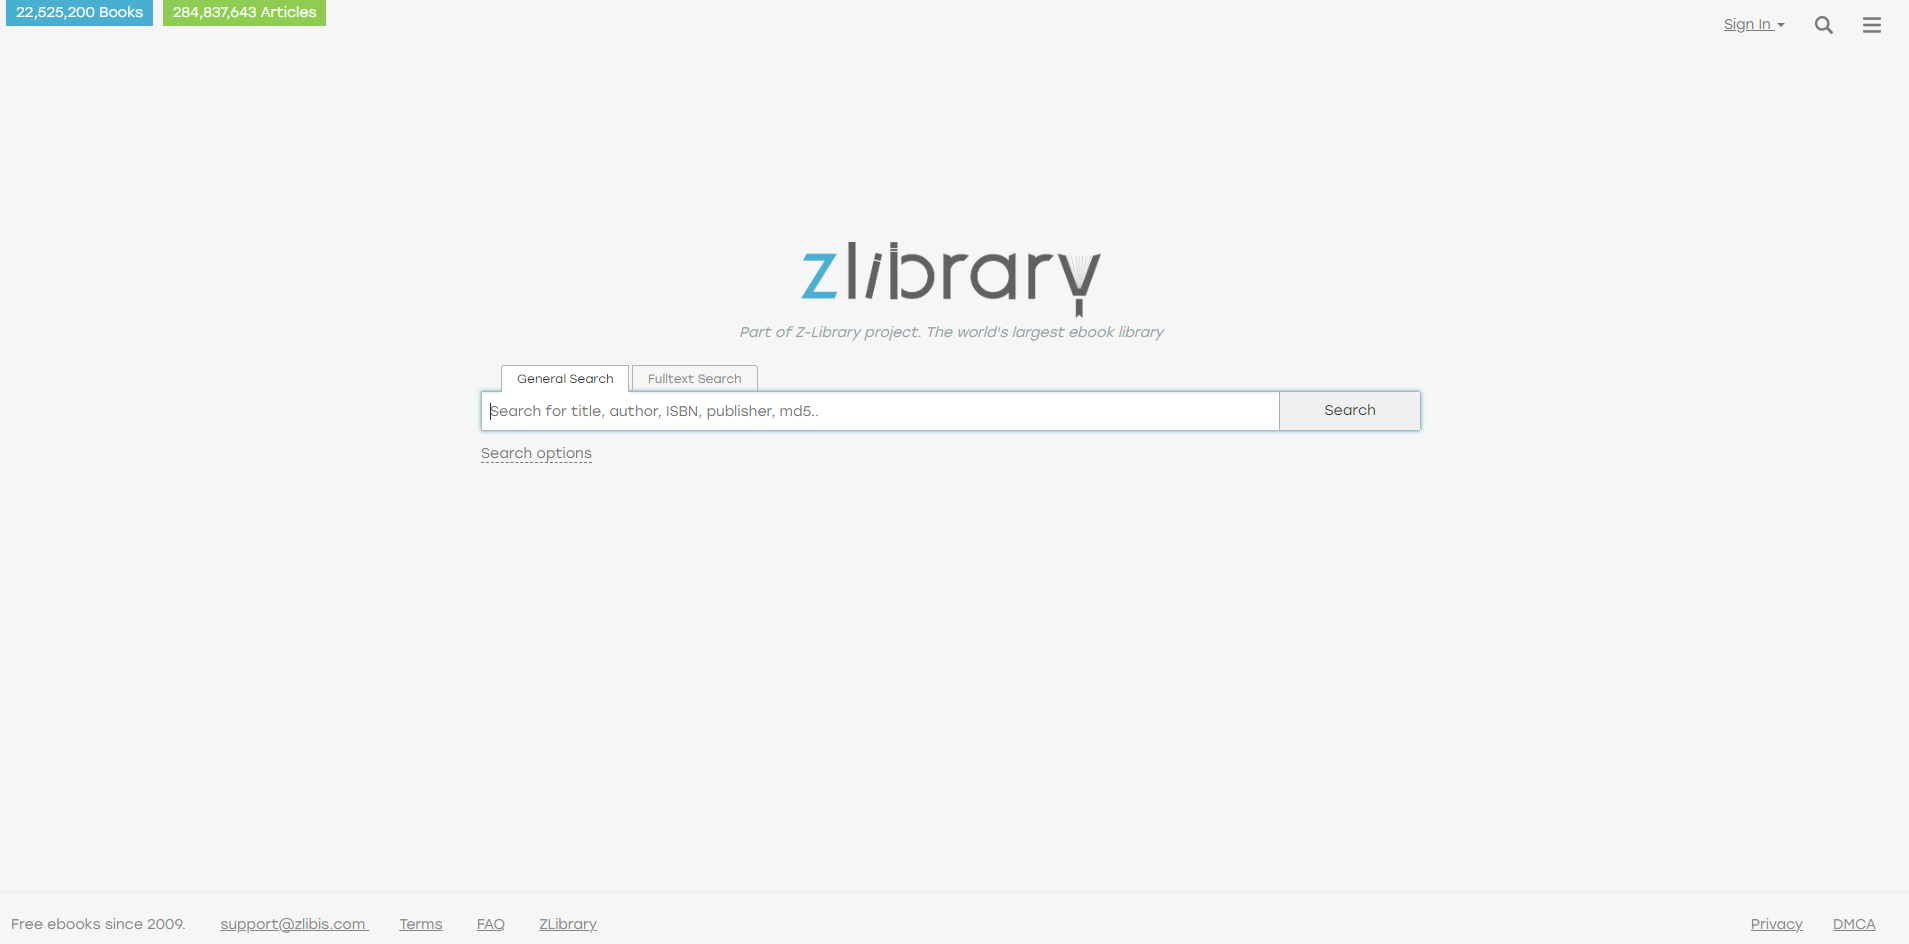 Zeta Library is legal? You can Download 65,000,000+ scientific articles for free